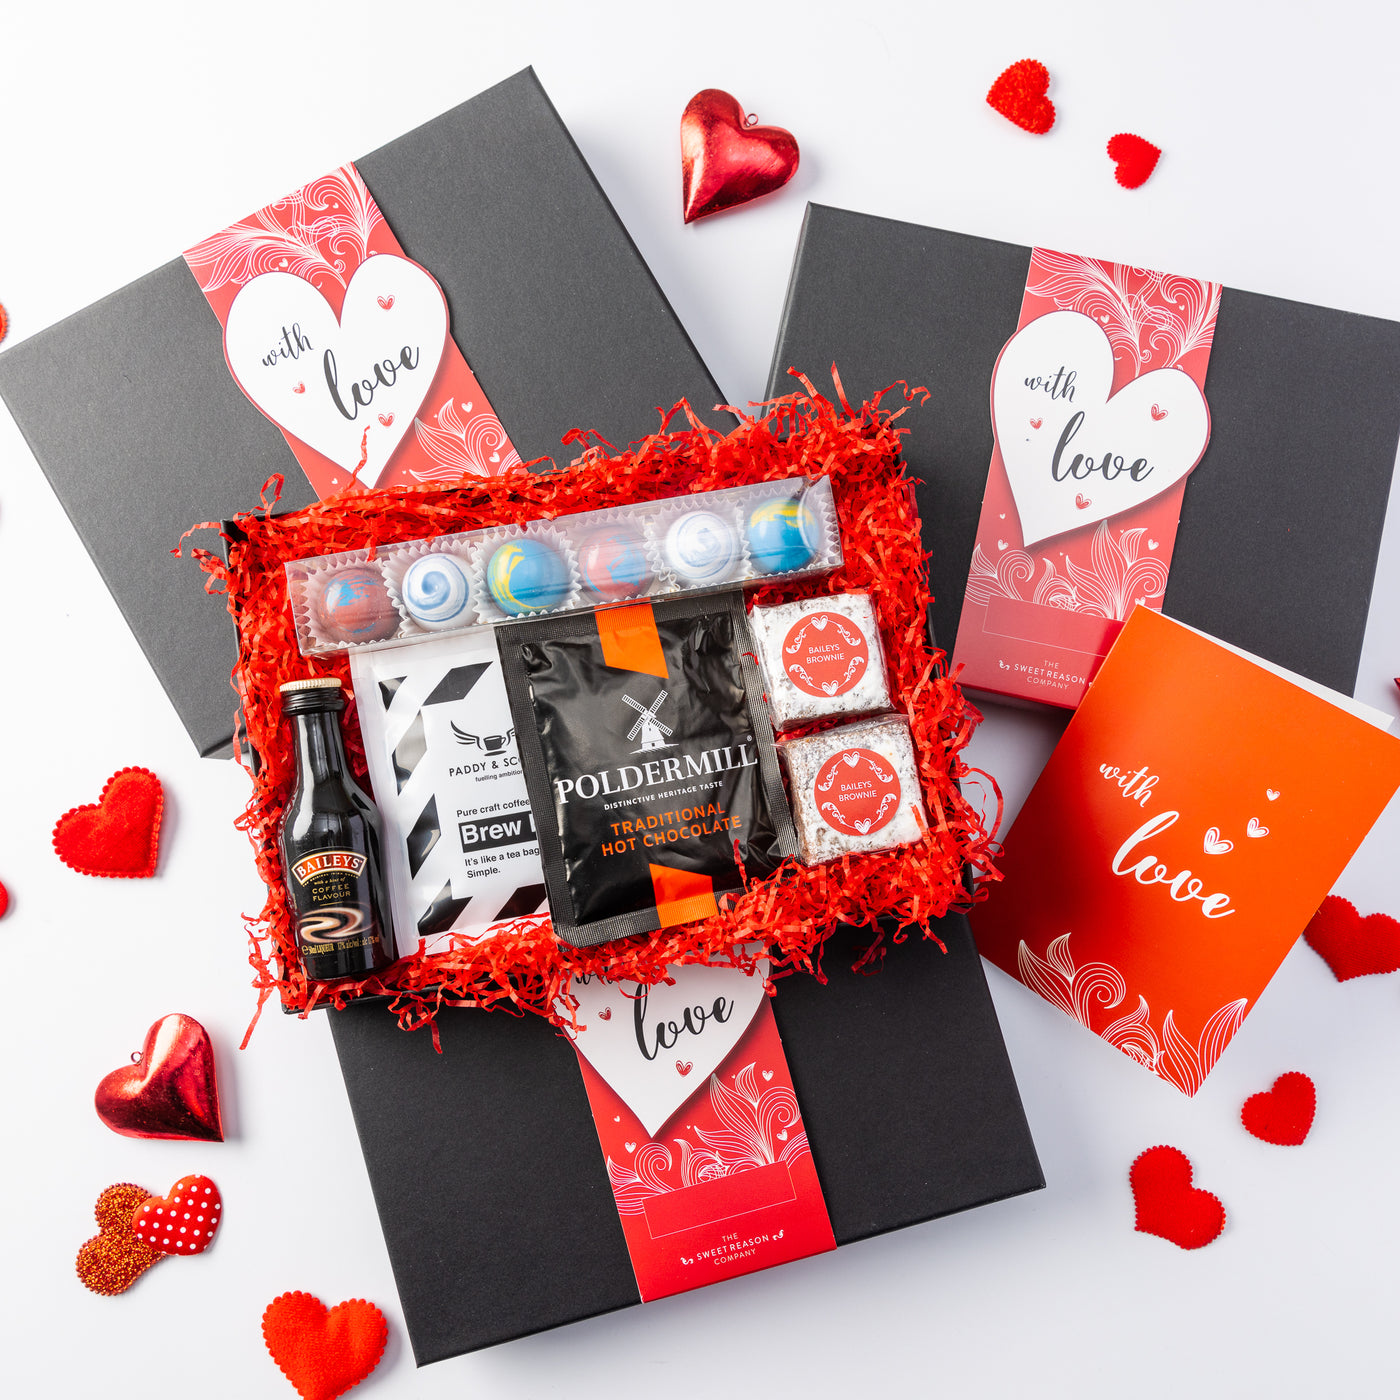 Red Heart Design With Love Gift Box Filled With Artisan Treats